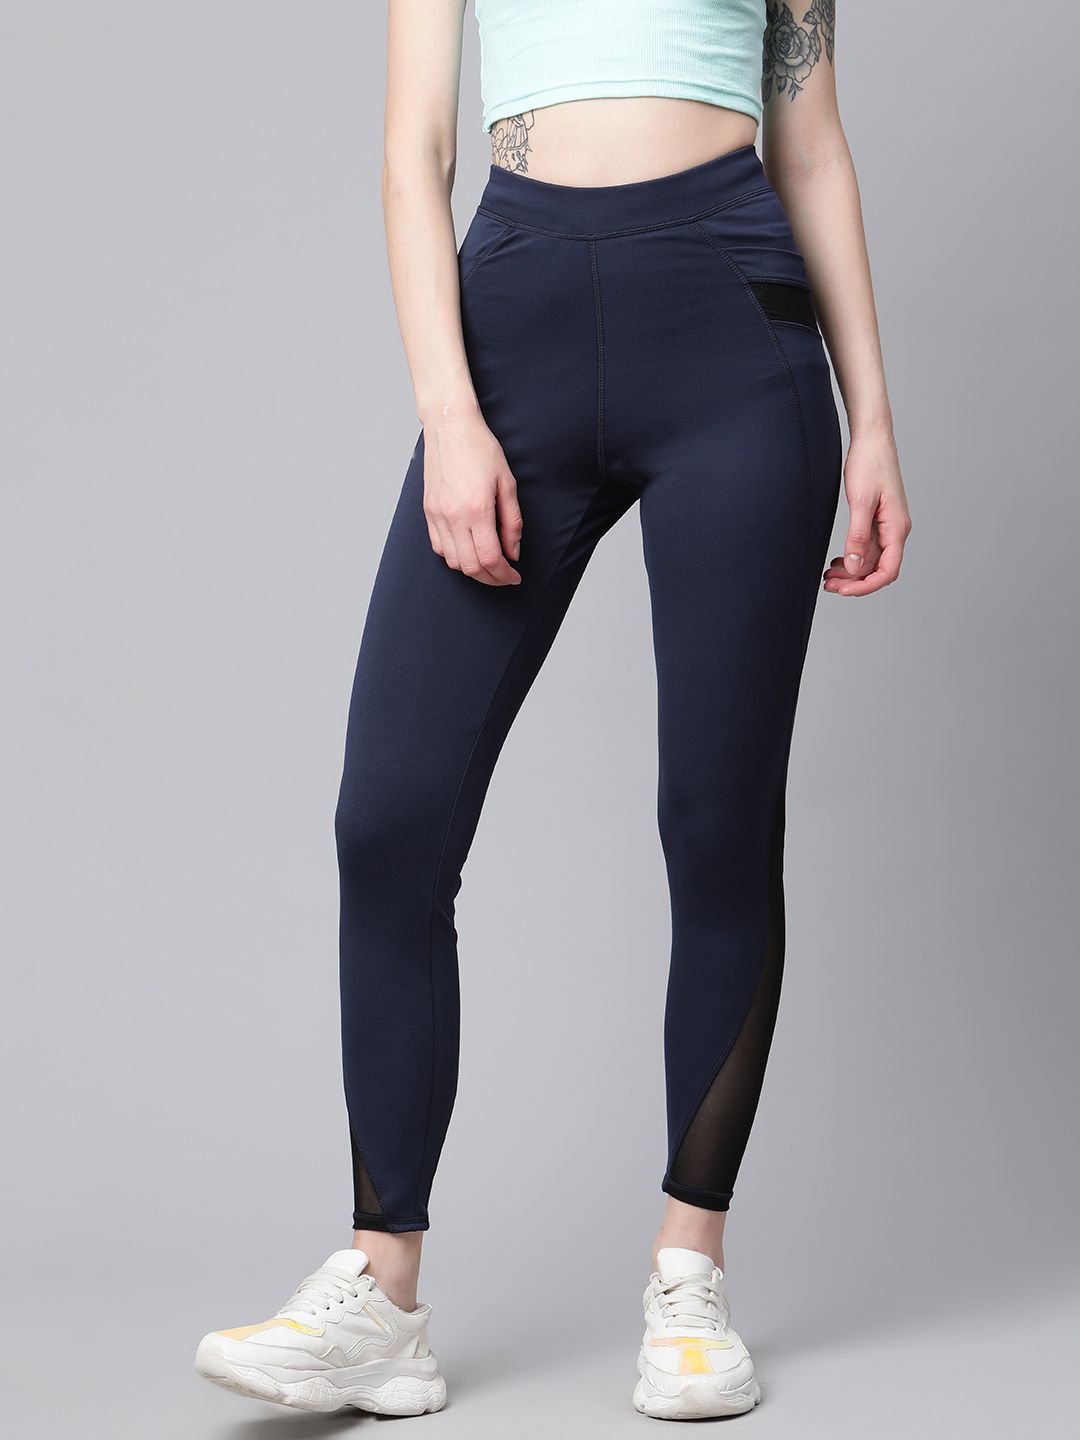 Blinkin Women Navy Blue Solid Training Tights with Mesh Inserts Detail Price in India